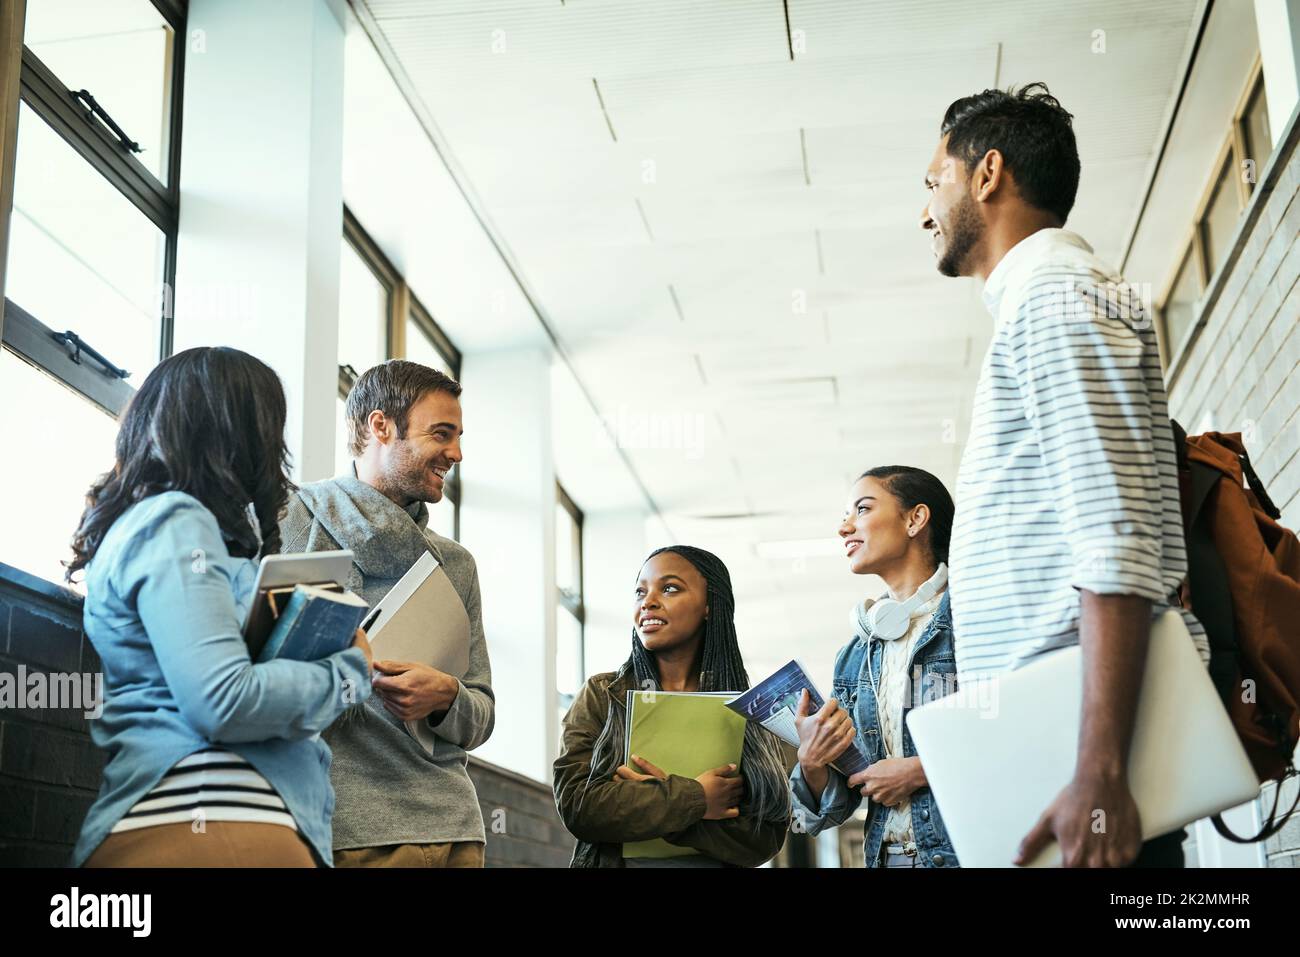 Catching up between classes. Low angle shot of a group of university students talking while standing in a campus corridor. Stock Photo